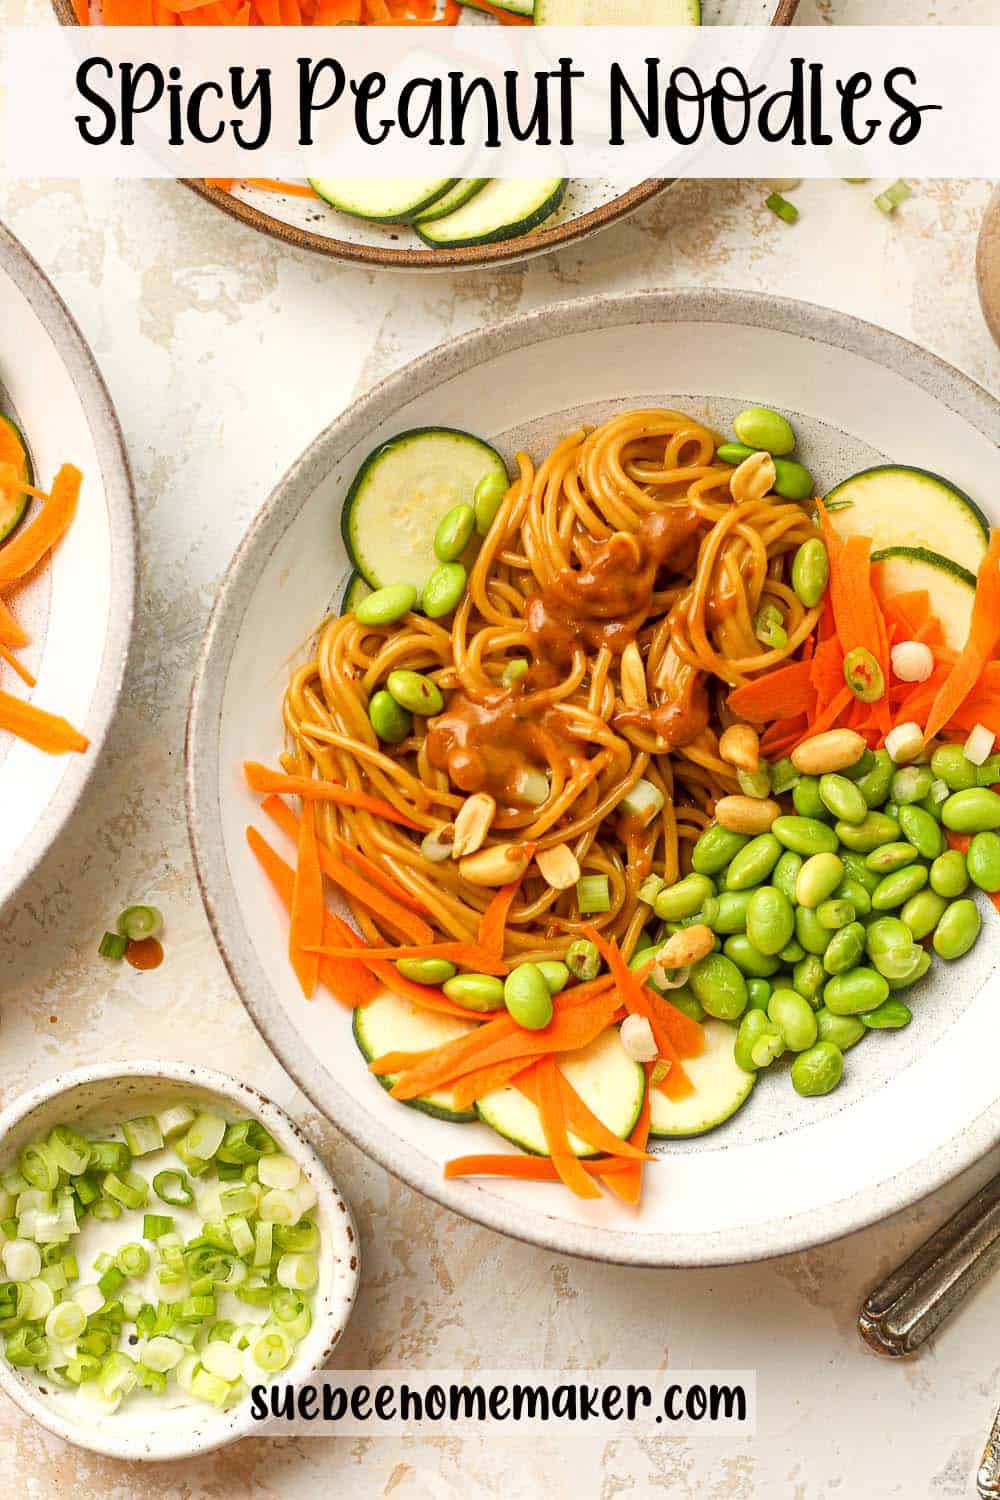 Two bowls of spicy peanut noodles with veggies.